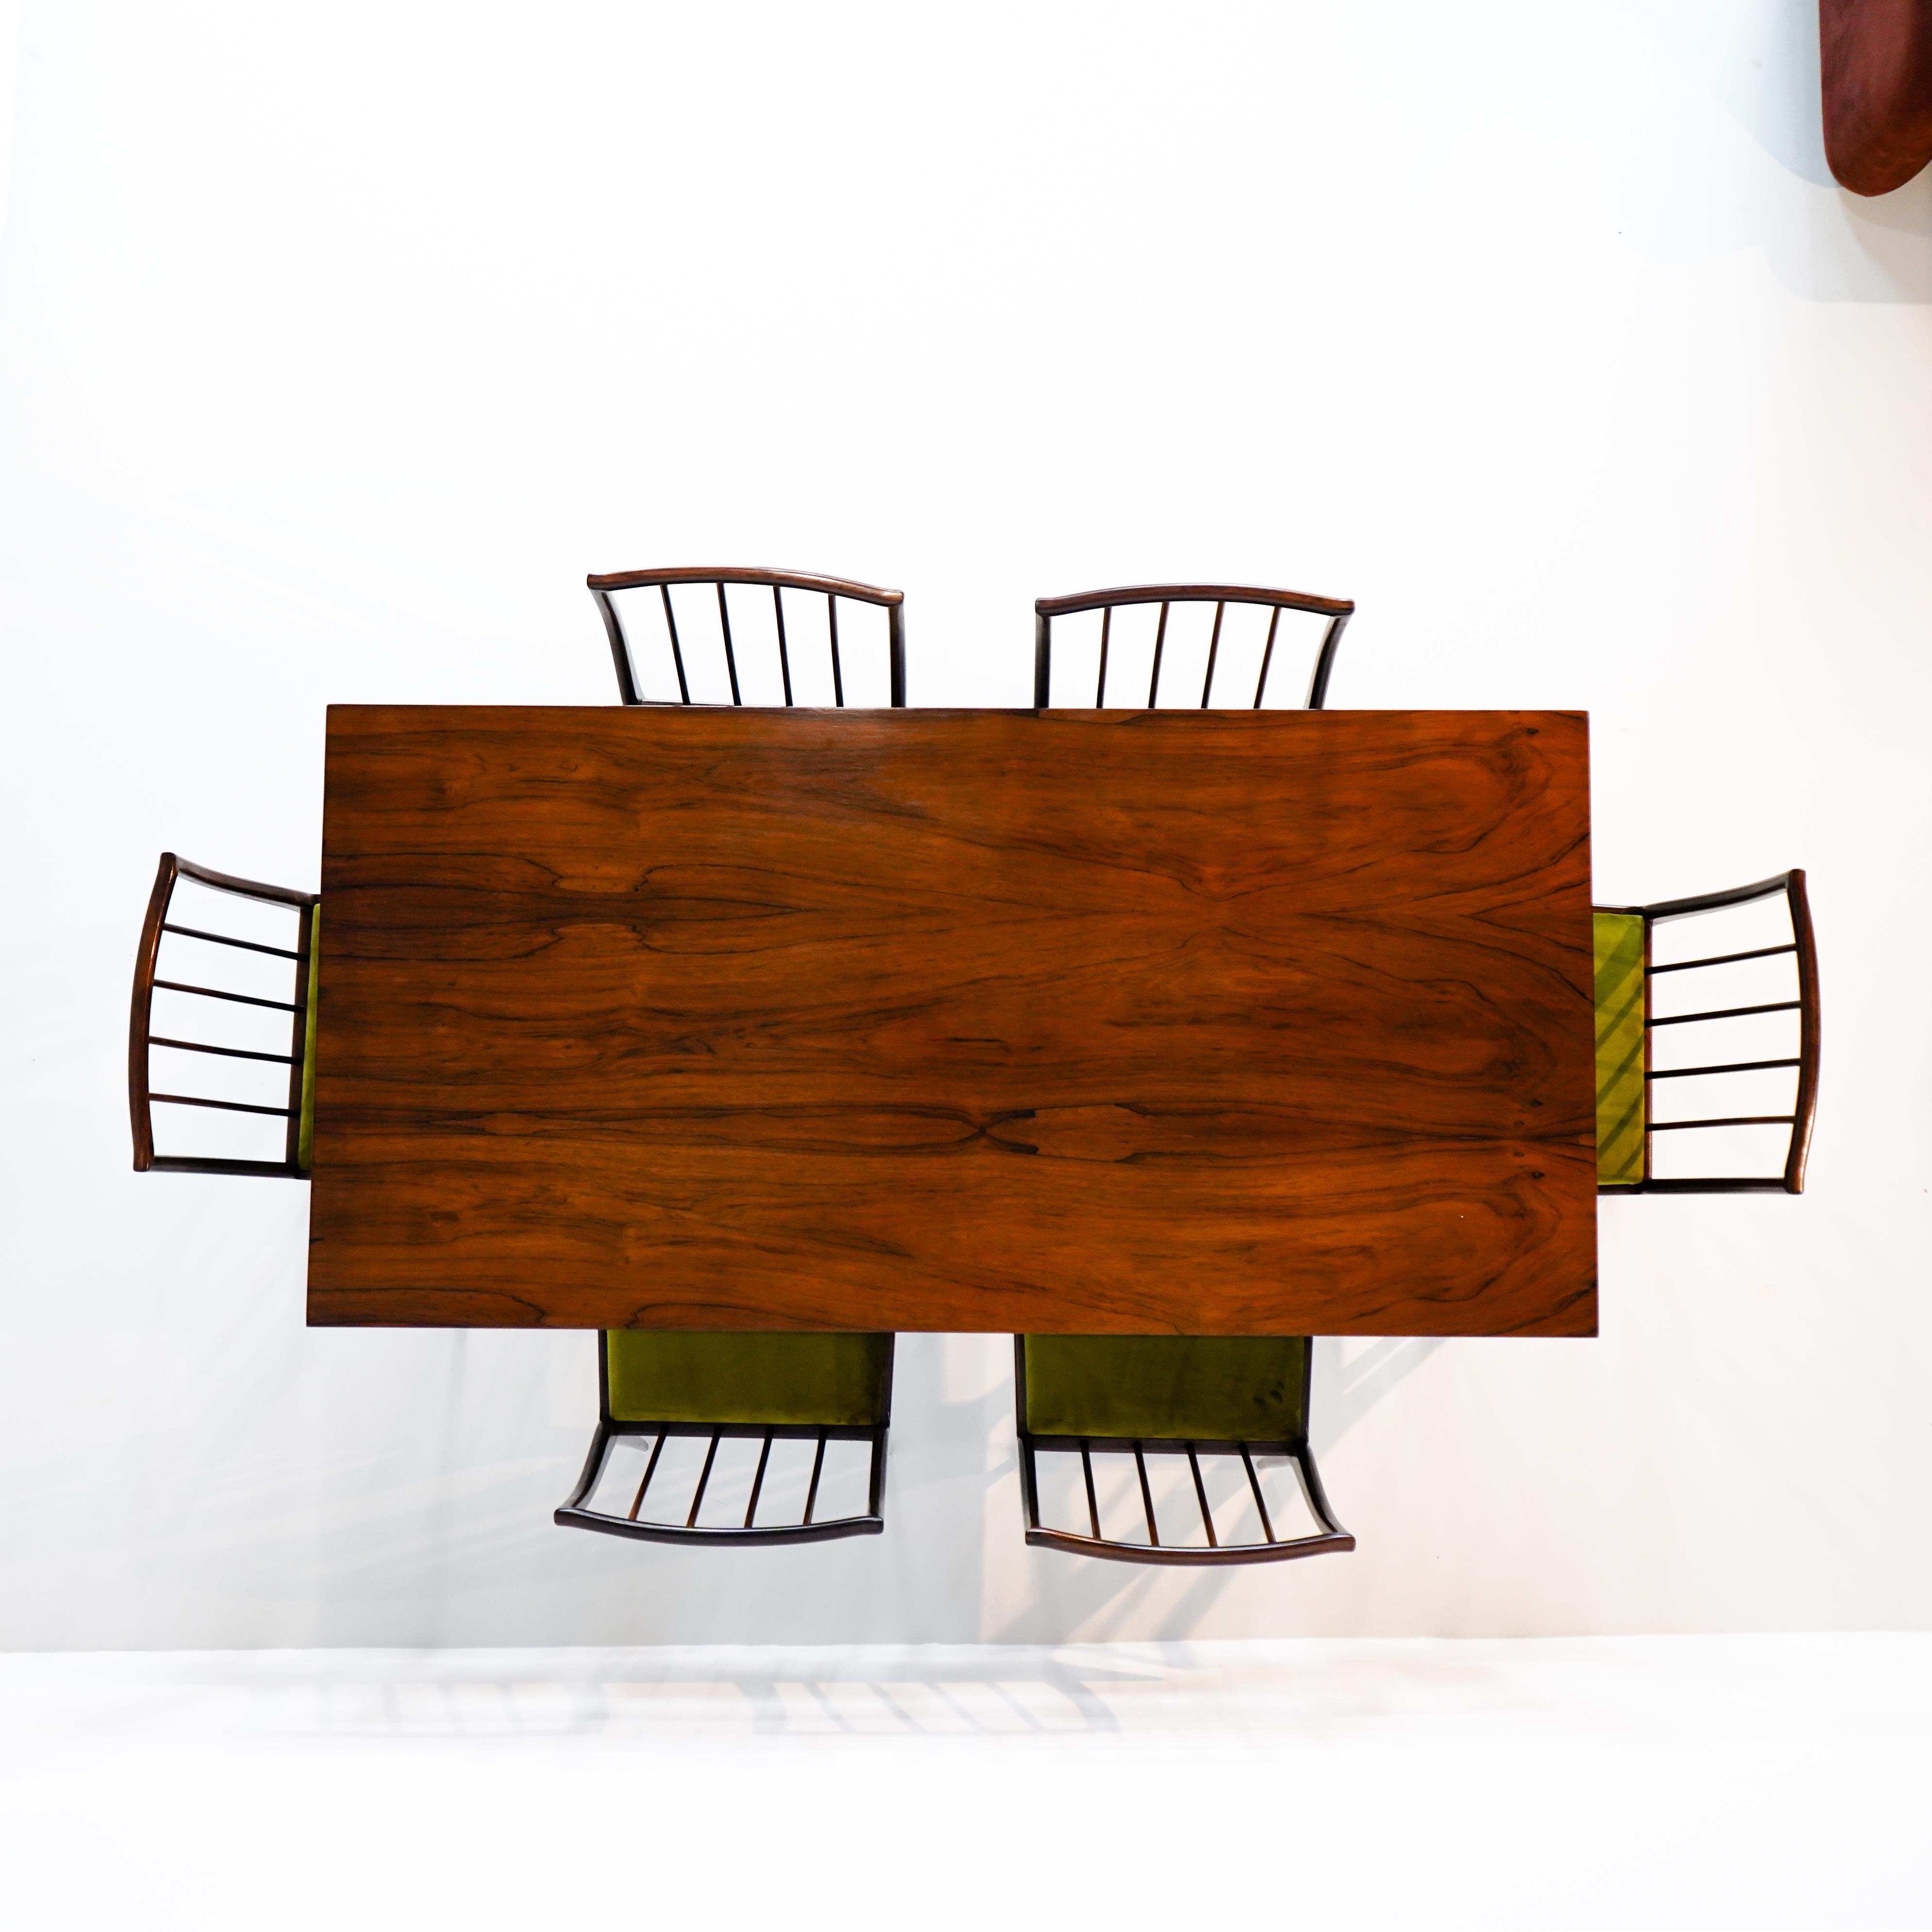 GB01 RIPAS - 6 chairs and sealed table in Rosewood, Geraldo de Barro Unilabor For Sale 5